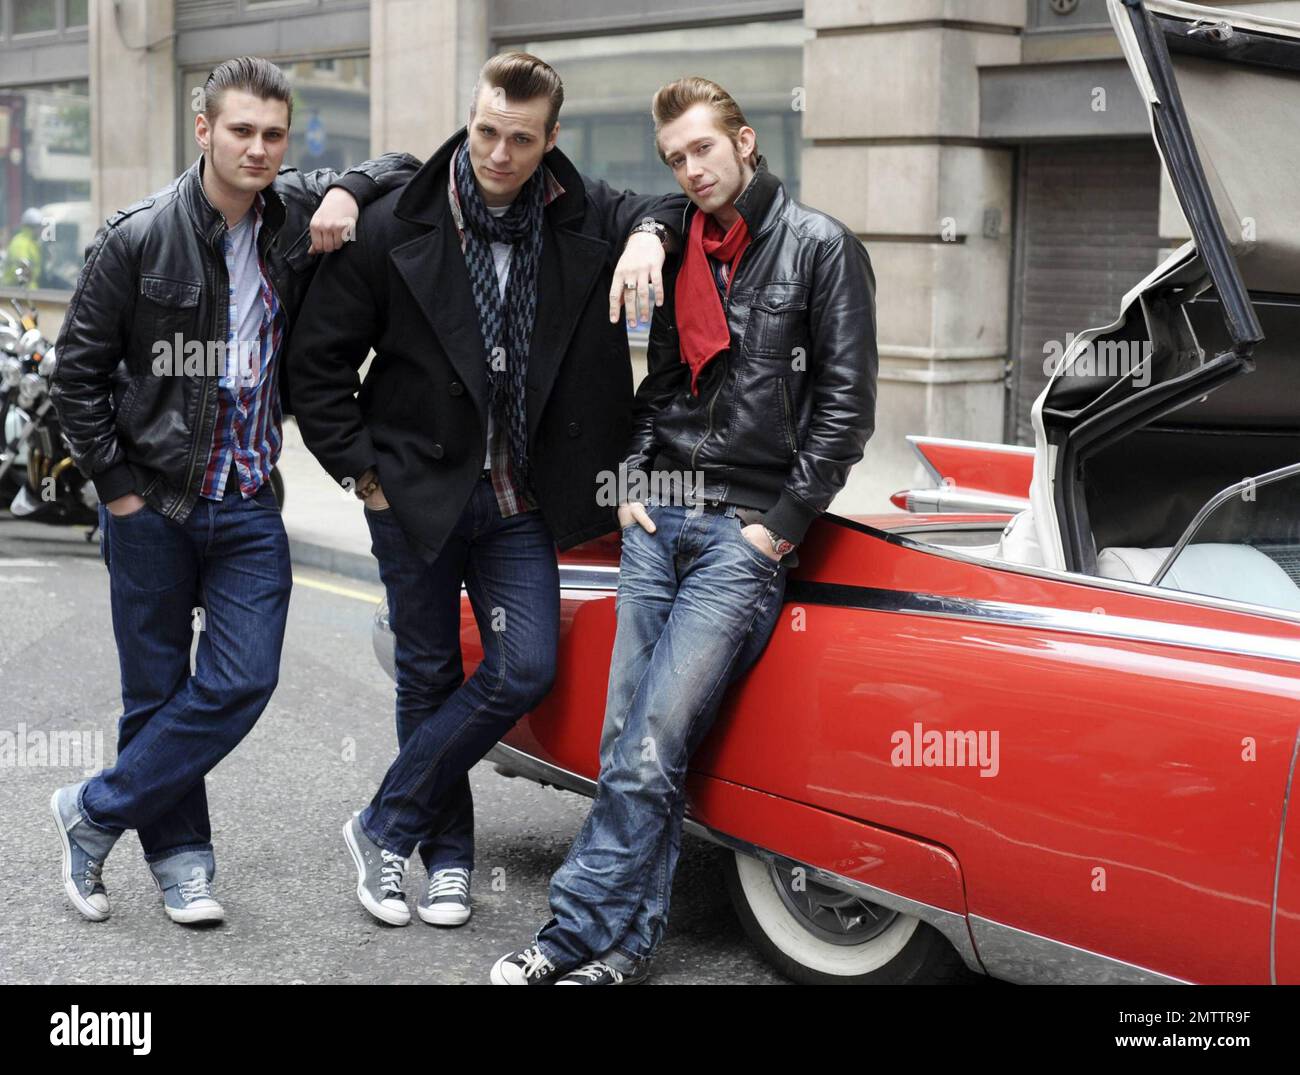 Berlin-bred rockabilly musicians The Baseballs pose in their classic red convertible Cadillac outside the BBC Radio 2 studios promoting their new album Strike. The trio, Sam, Digger and Basti, are known